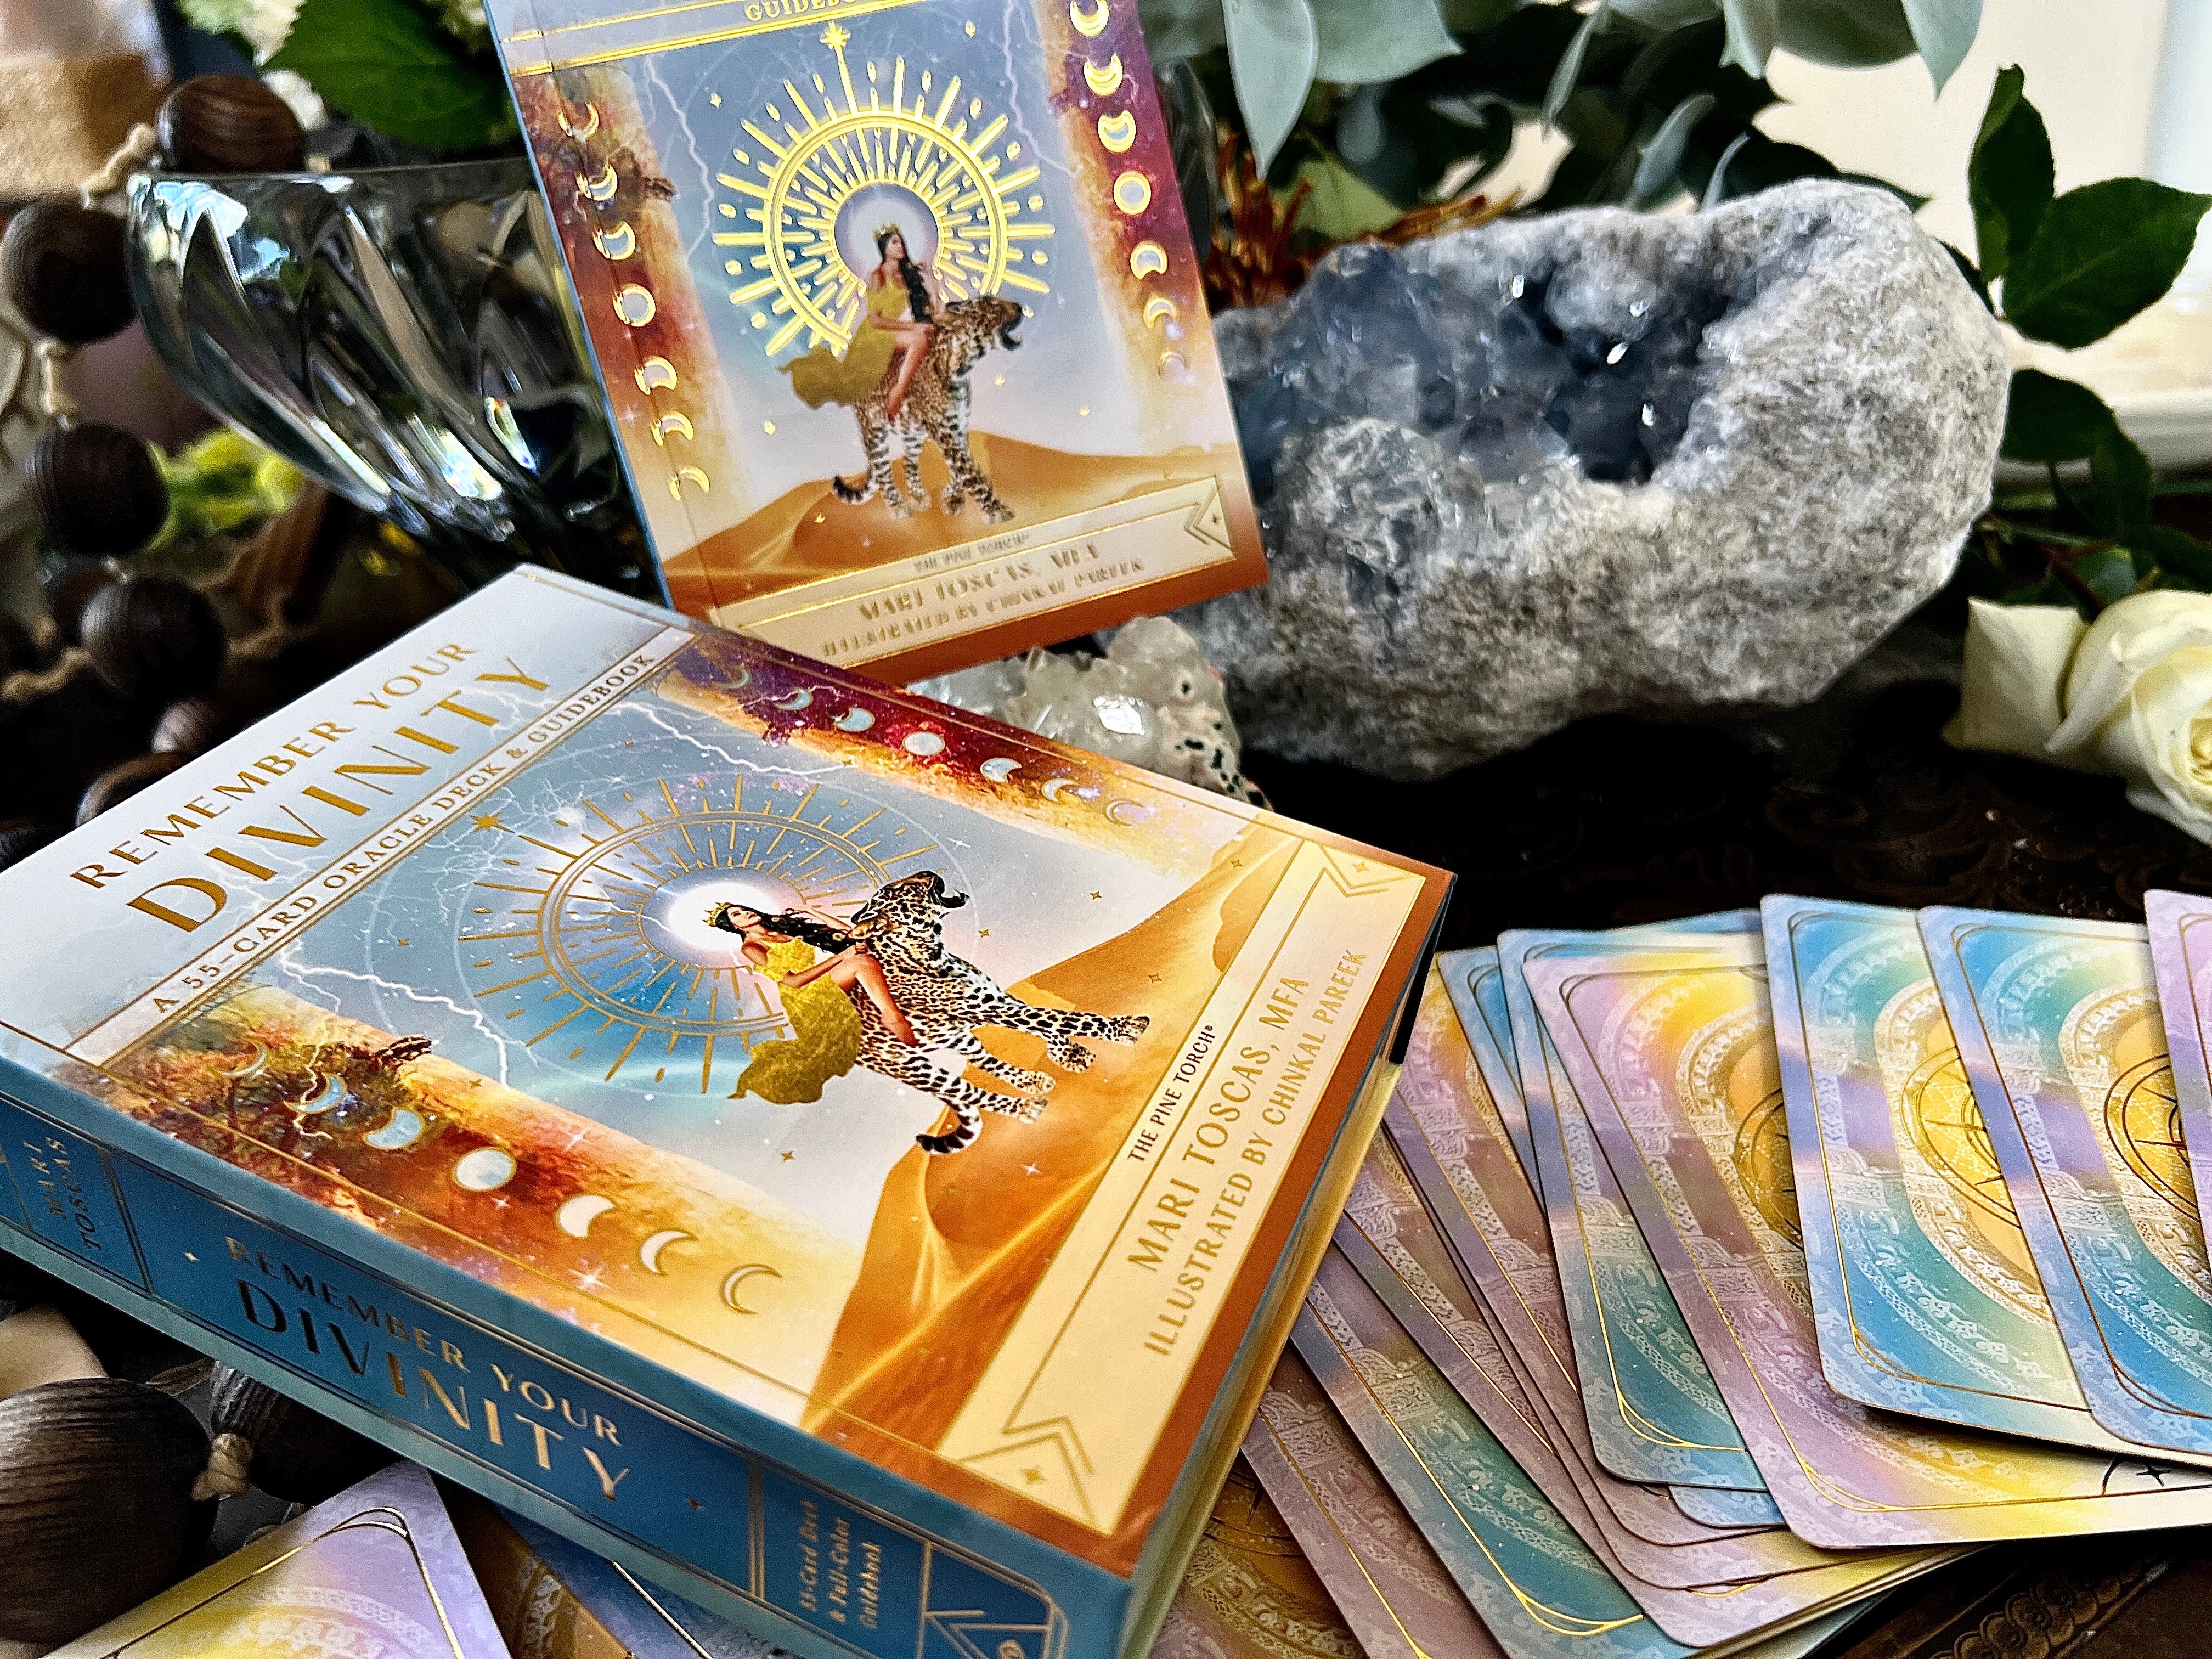 REMEMBER YOUR DIVINITY // 55 CARD DECK + GUIDEBOOK